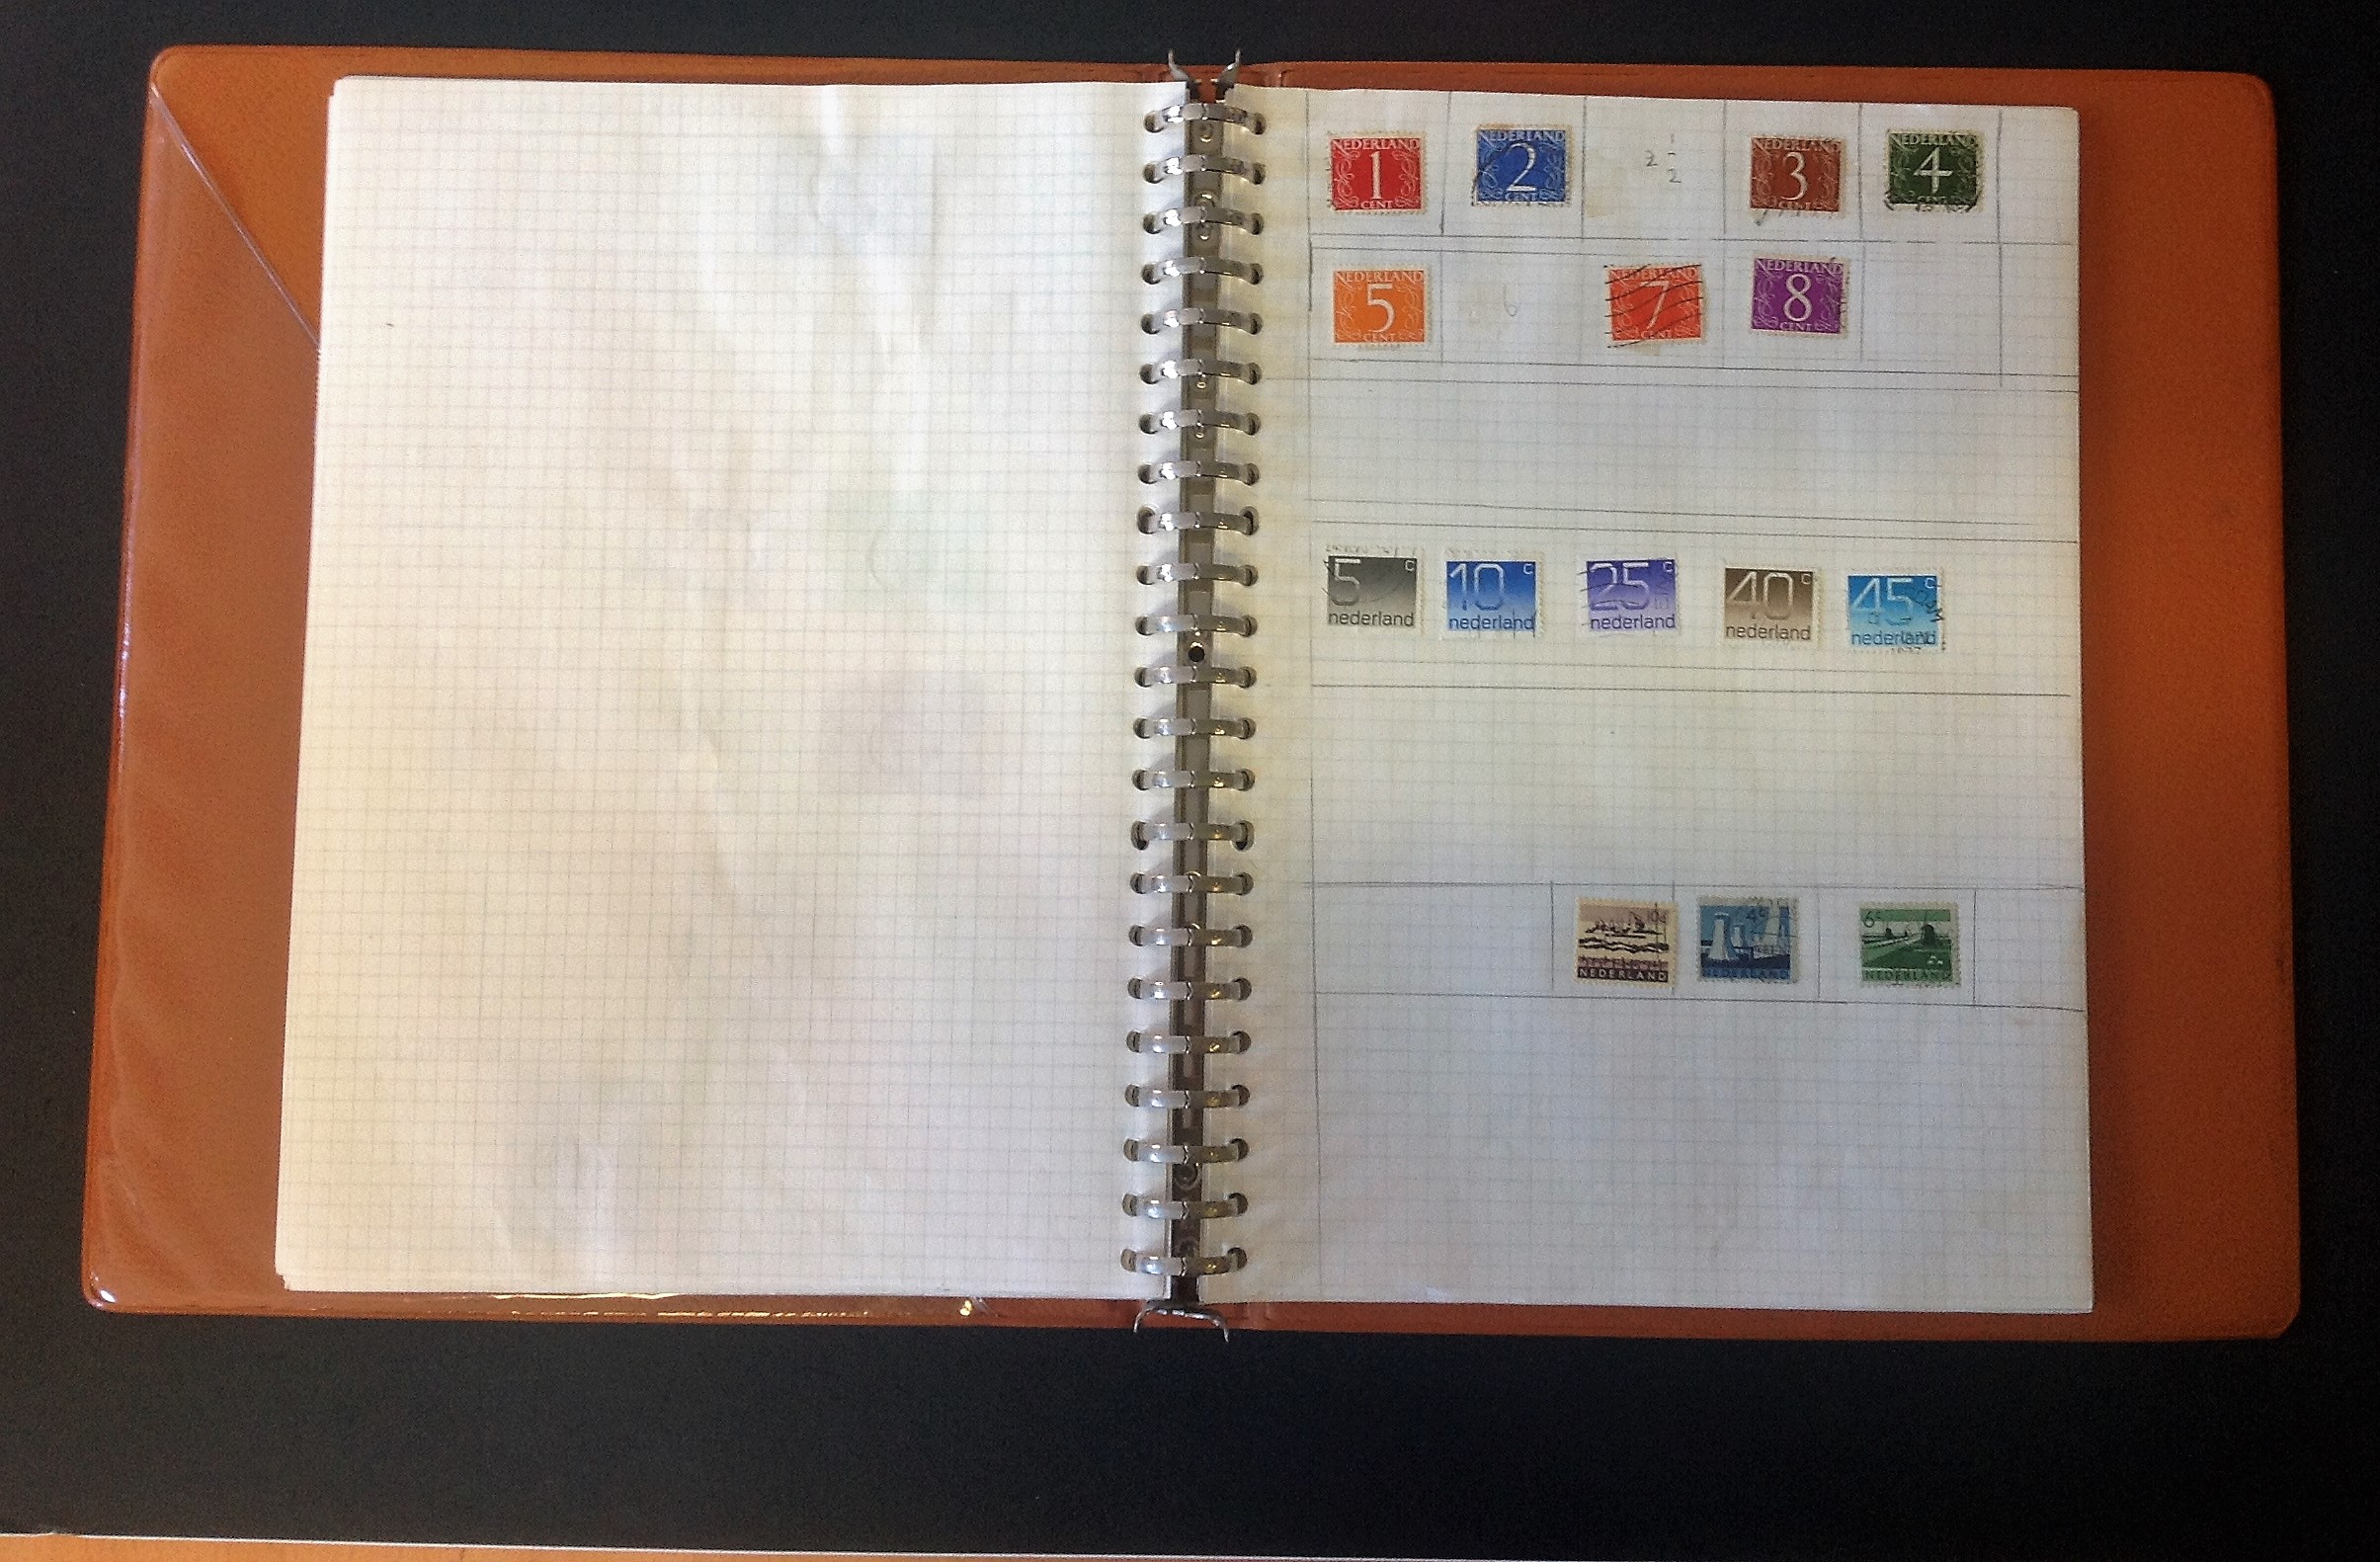 Nederland stamp collection in album. 50 sheets. Mint and used. Good condition. We combine postage on - Image 5 of 7